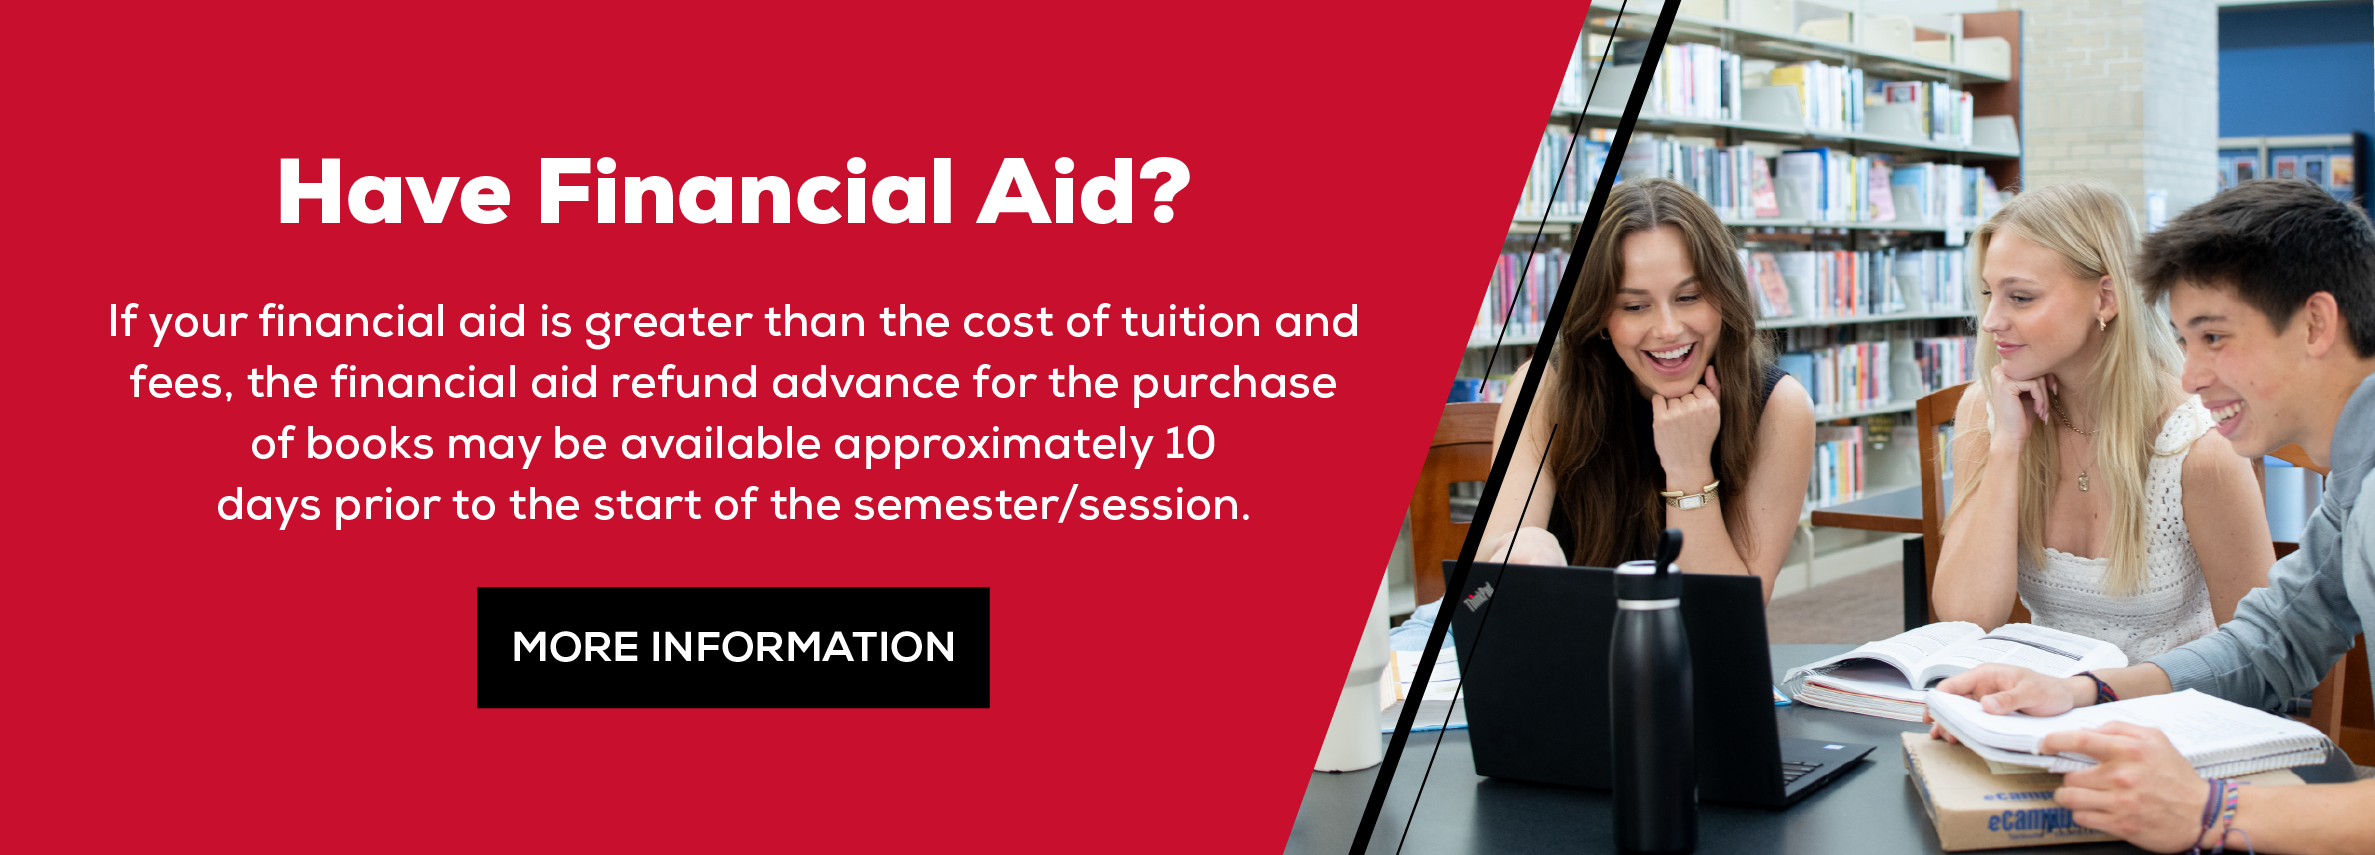 Have Financial Aid? If your financial aid is greater than the cost of tuition and fees, the financial  aid refund advance for the purchase of books may be available approximately 10  days prior to the start of the semester/session. More Information (new tab)